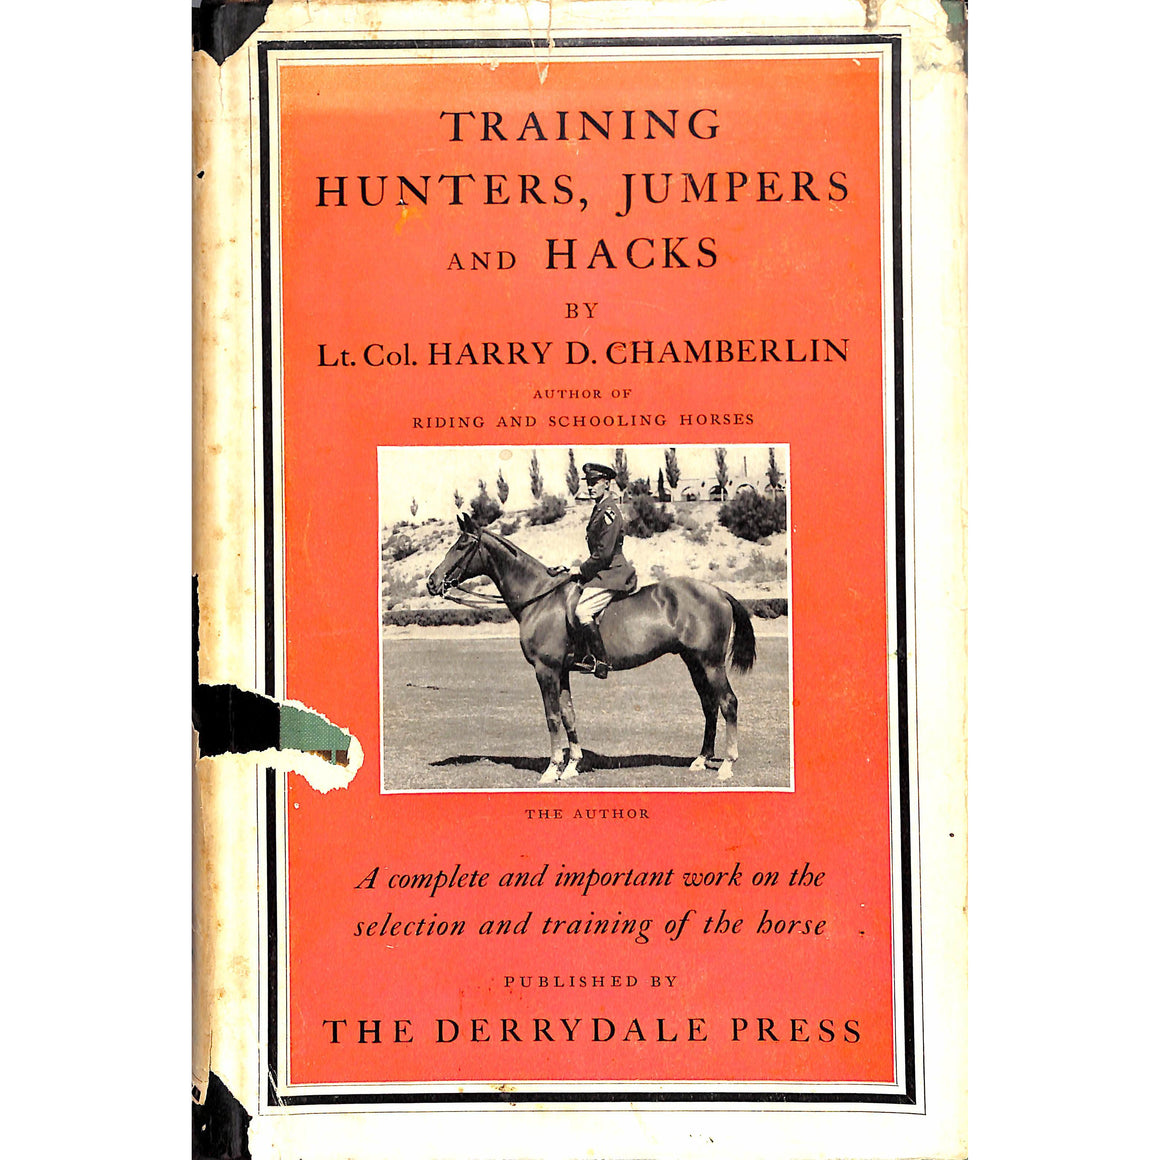 Training Hunters, Jumpers and Hacks